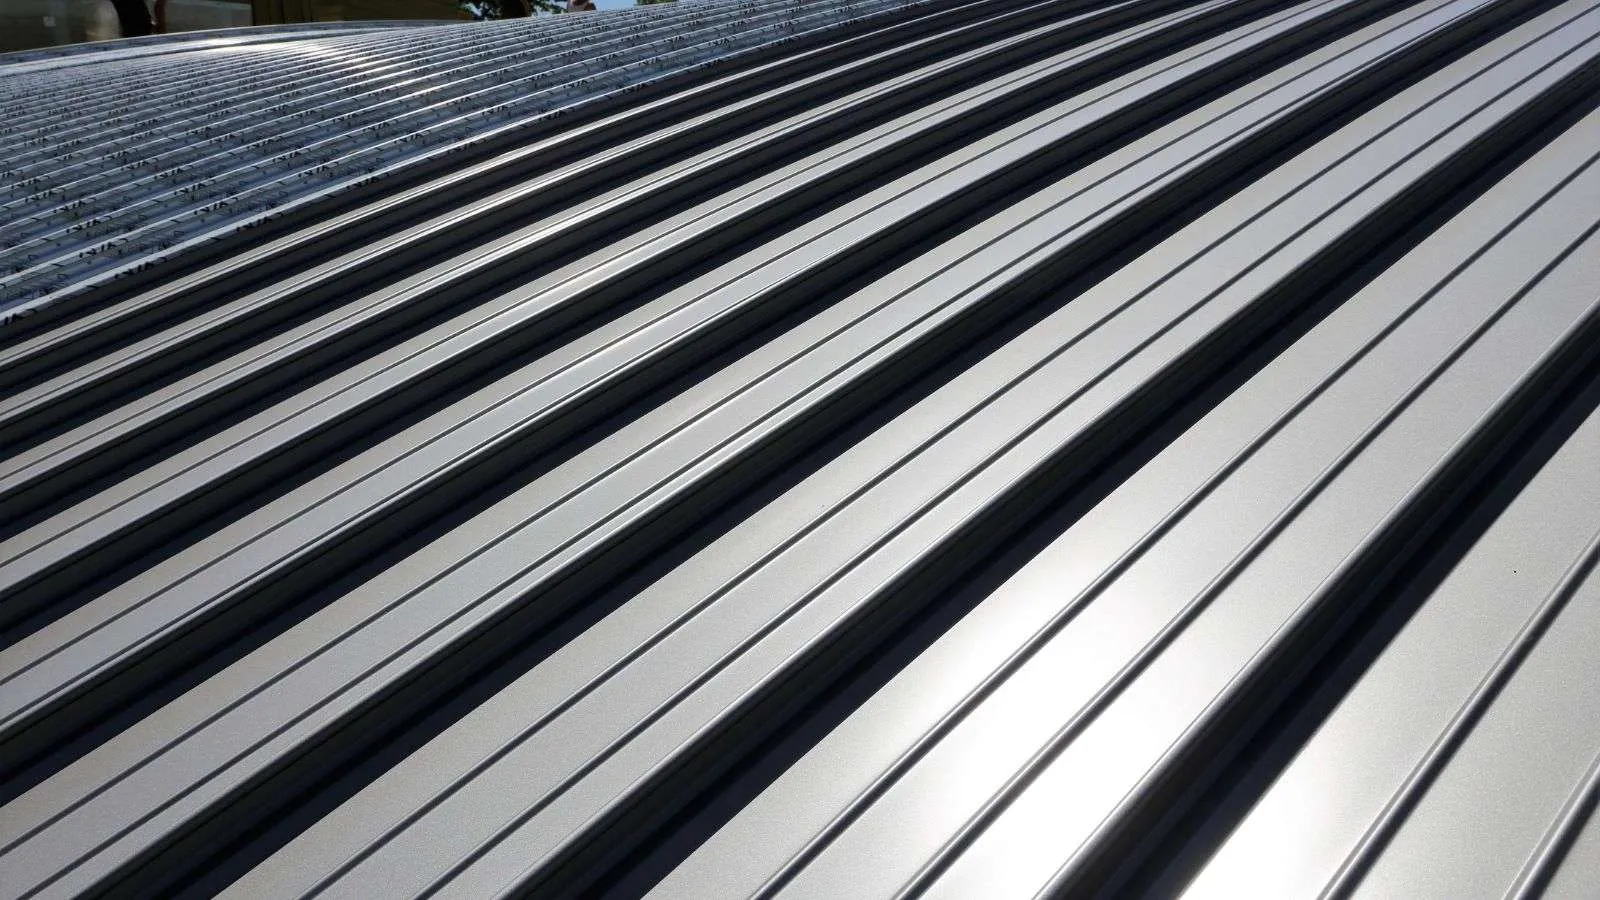 Aluminum roofing advantages and disadvantages - bighomeprojects.com